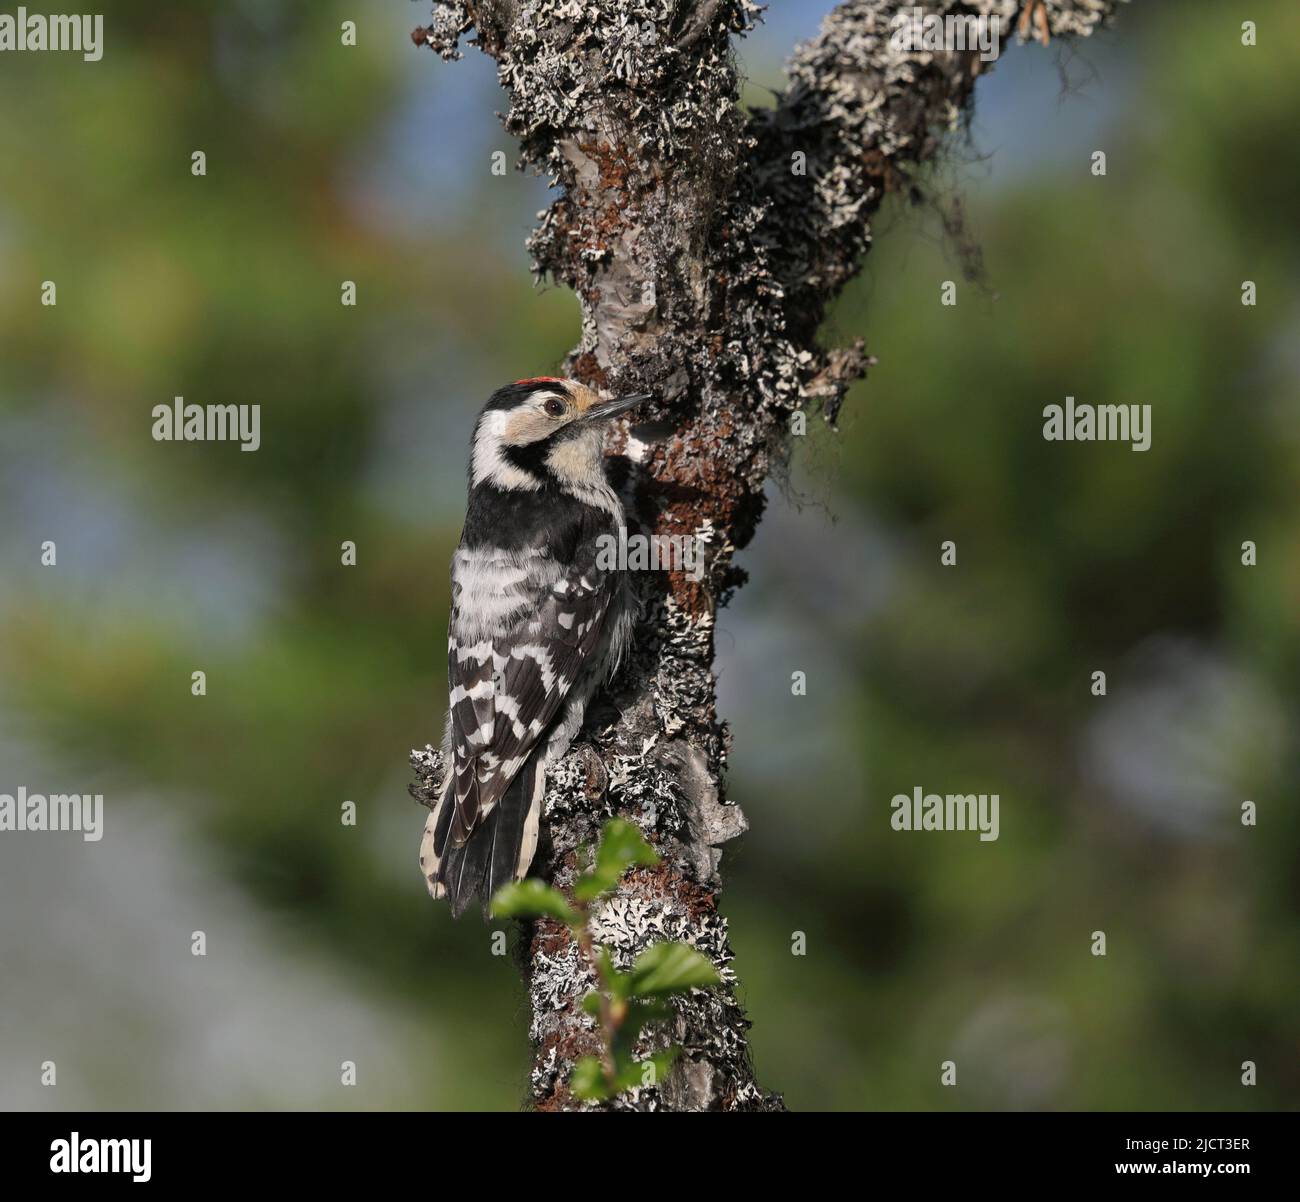 Lesser spotted woodpecker, Dryobates minor, on tree with lichens Stock Photo